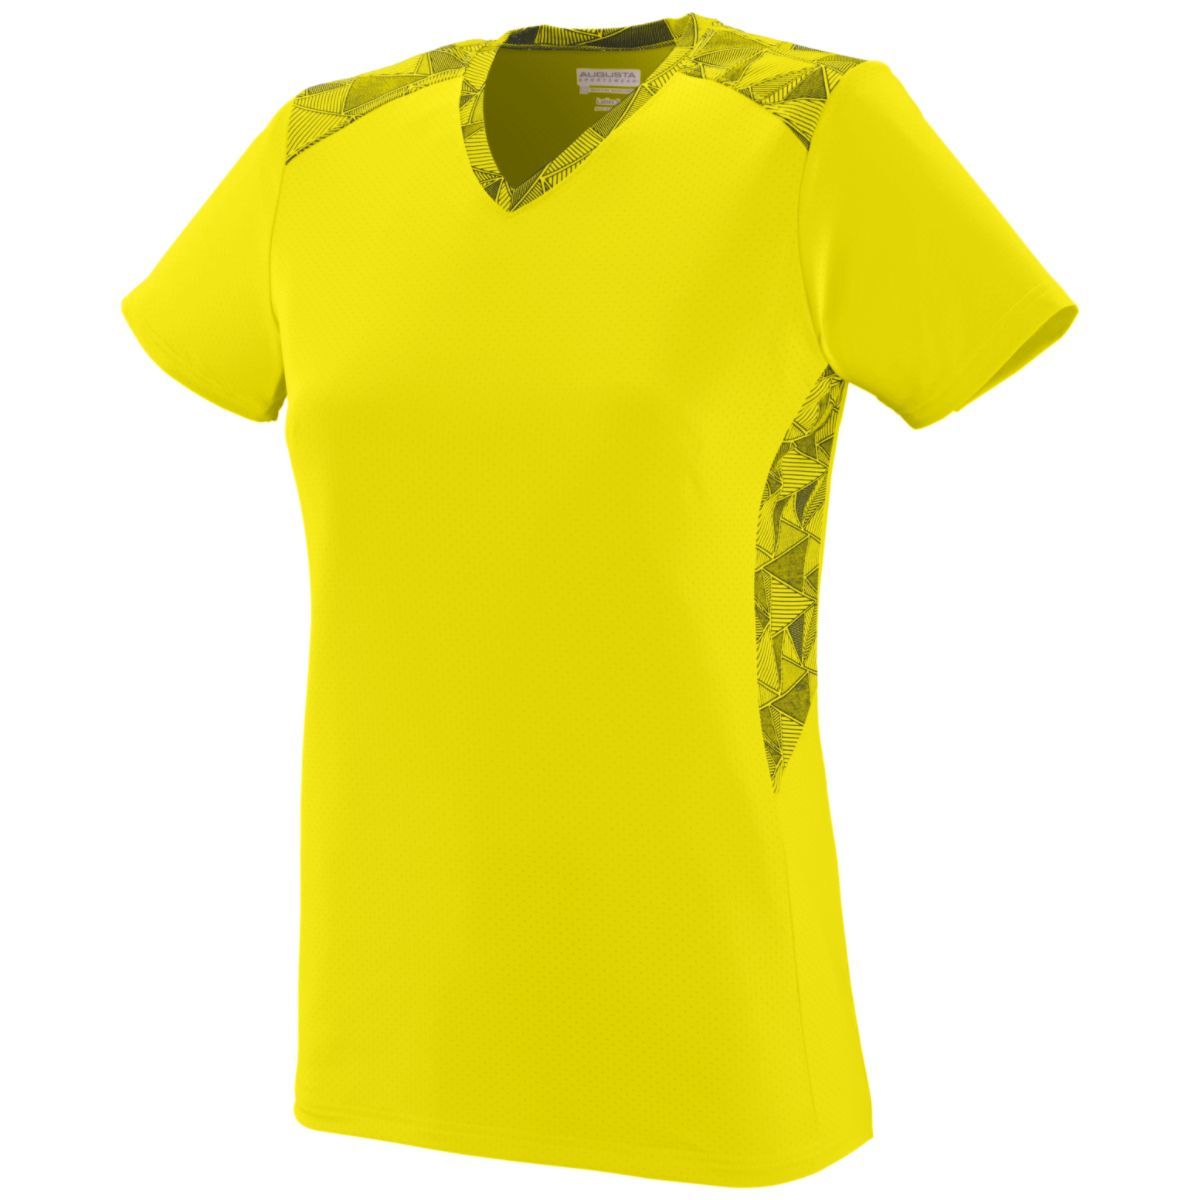 Augusta Sportswear Ladies Vigorous Jersey in Power Yellow/Power Yellow/Black Print  -Part of the Ladies, Ladies-Jersey, Augusta-Products, Softball, Shirts product lines at KanaleyCreations.com